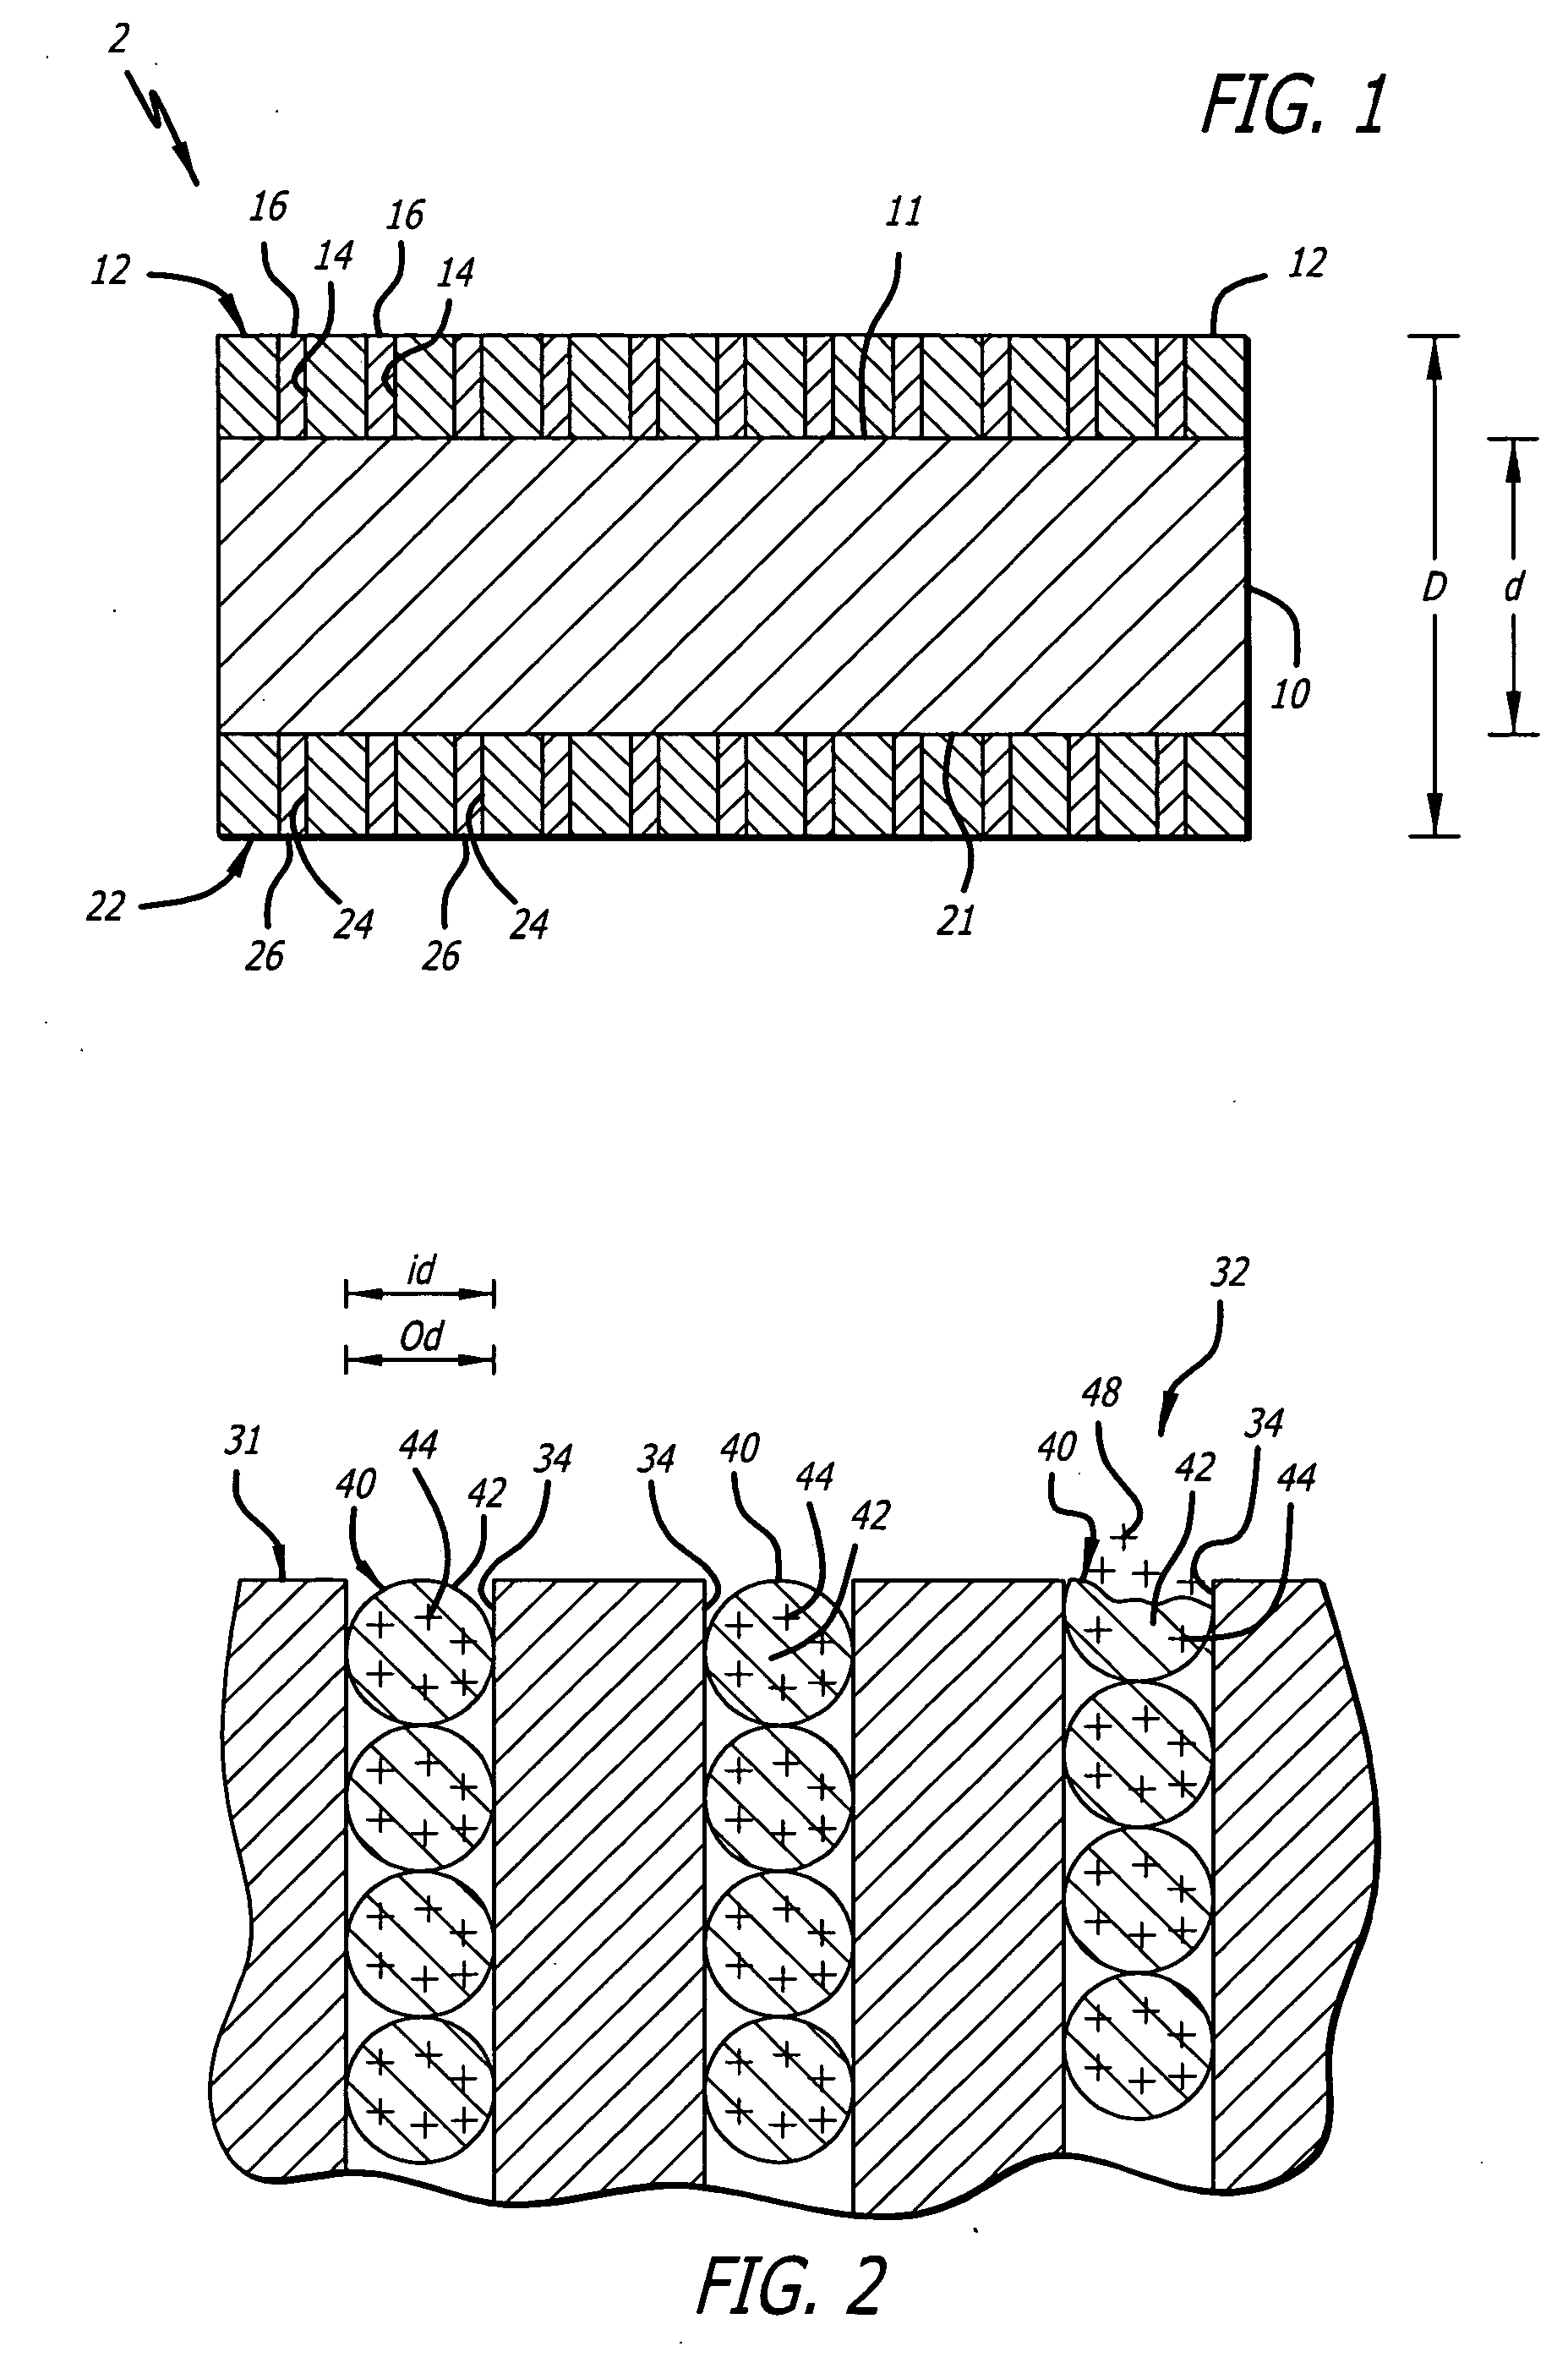 Medical device with porous surface containing bioerodable bioactive composites and related methods